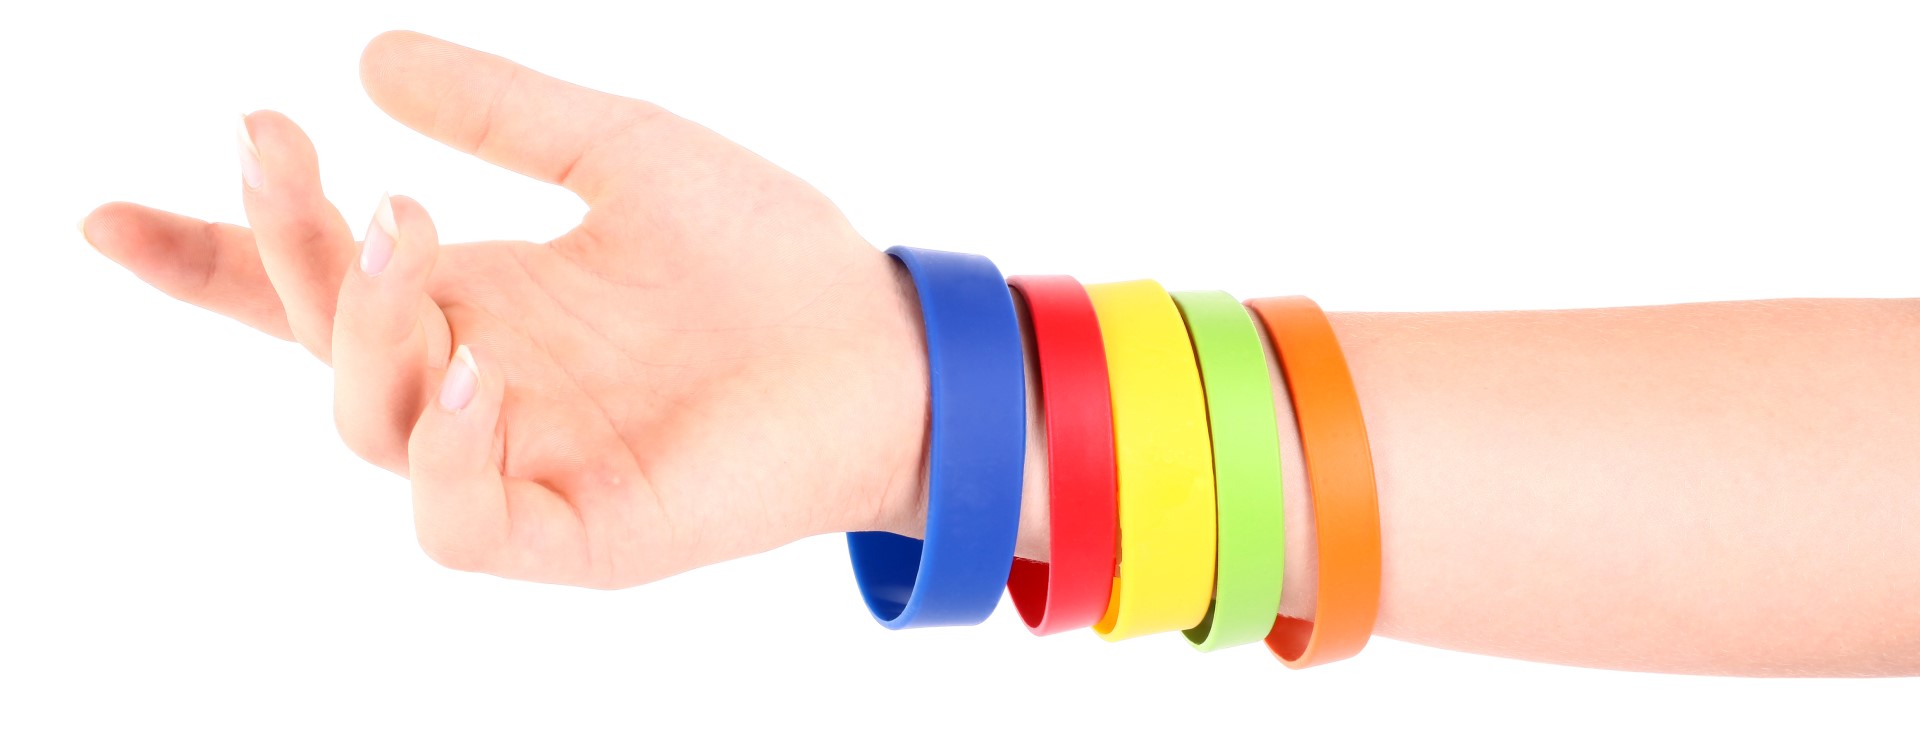 Social Distancing Wristbands Color Meaning